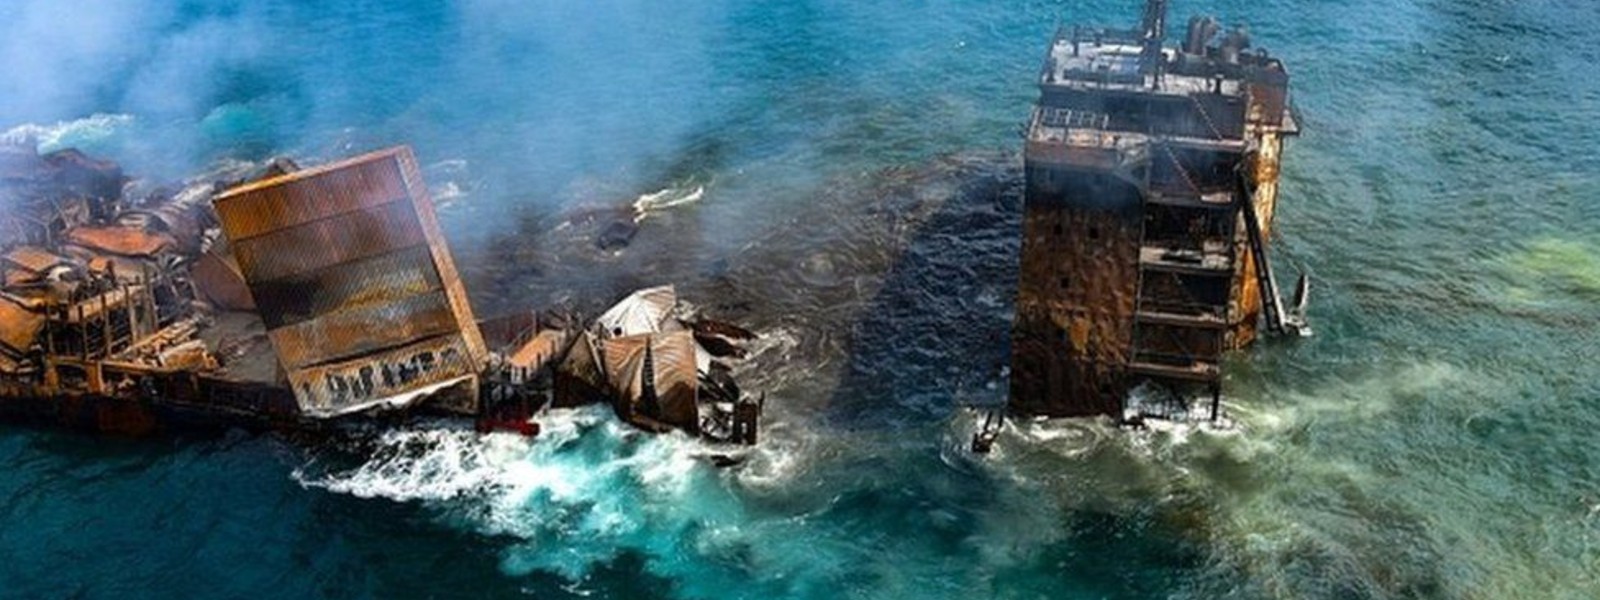 X-PRESS PEARL: Wreck removal in January 2022